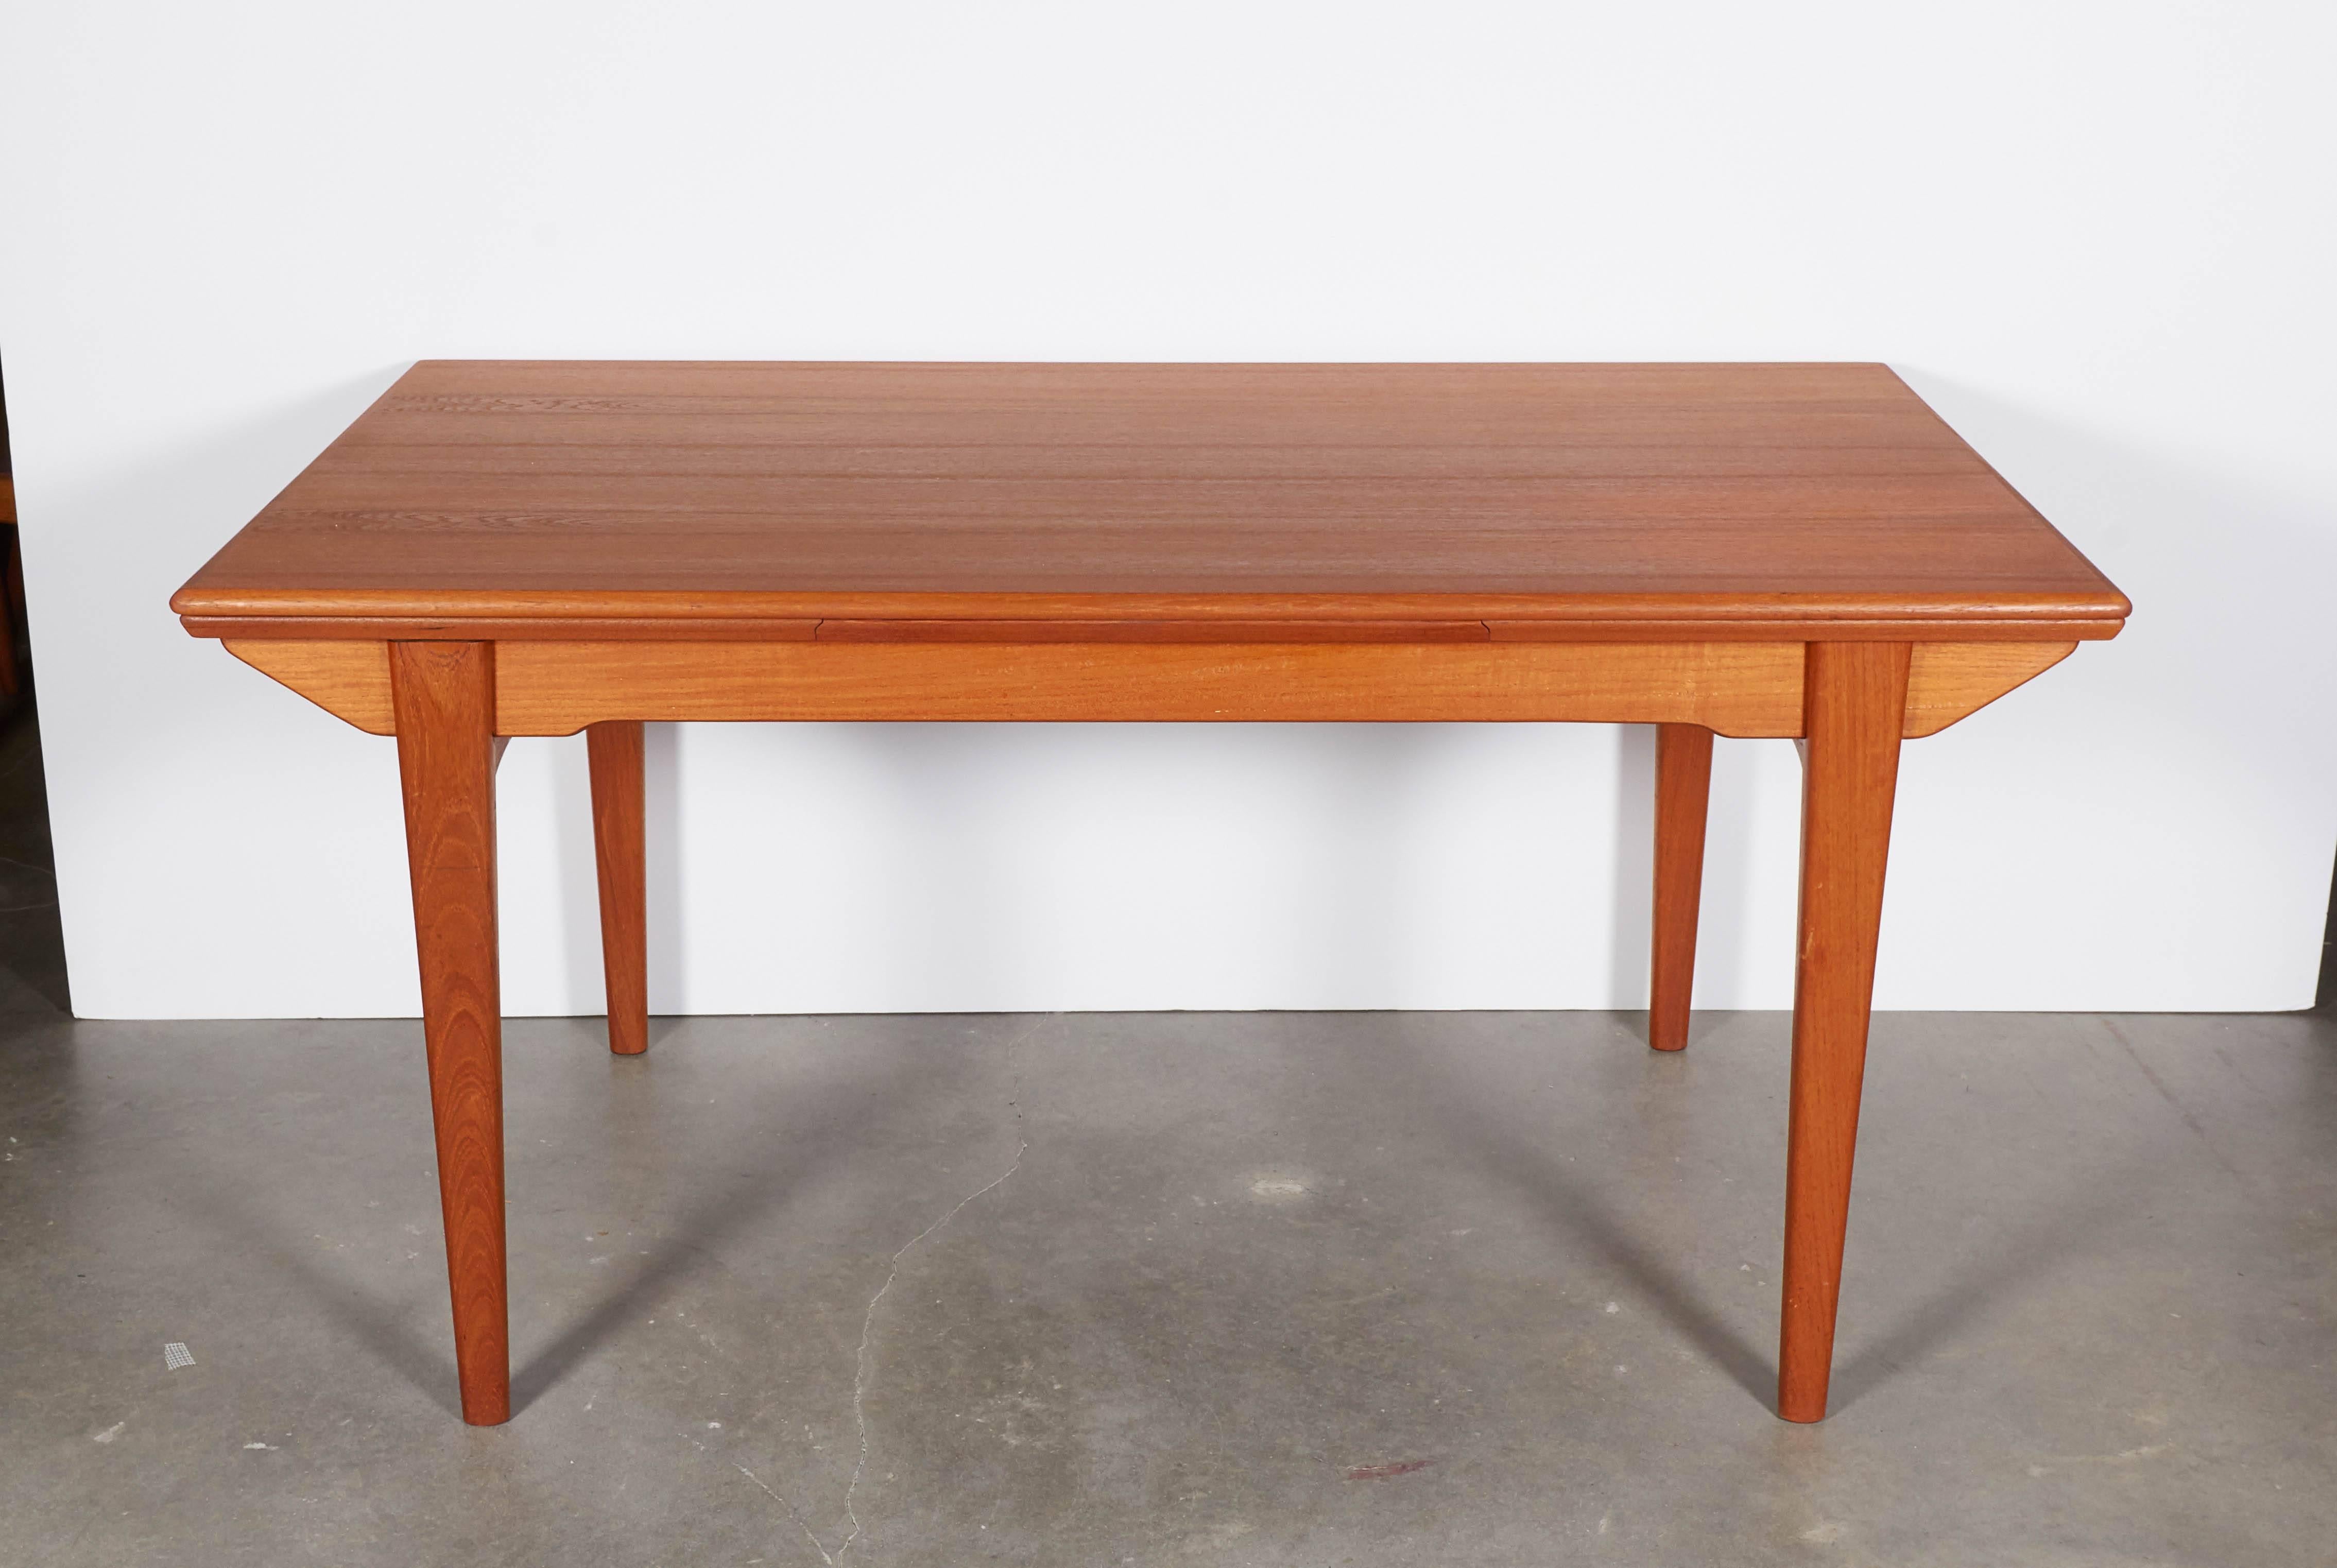 Vintage 1960s Danish Teak Dining Table with 2 Leaves

This dining table is in excellent condition and is also expandable. The leaves are 19.25" each and pull out from either side. Ready for pick up, delivery, or shipping anywhere in the world. 